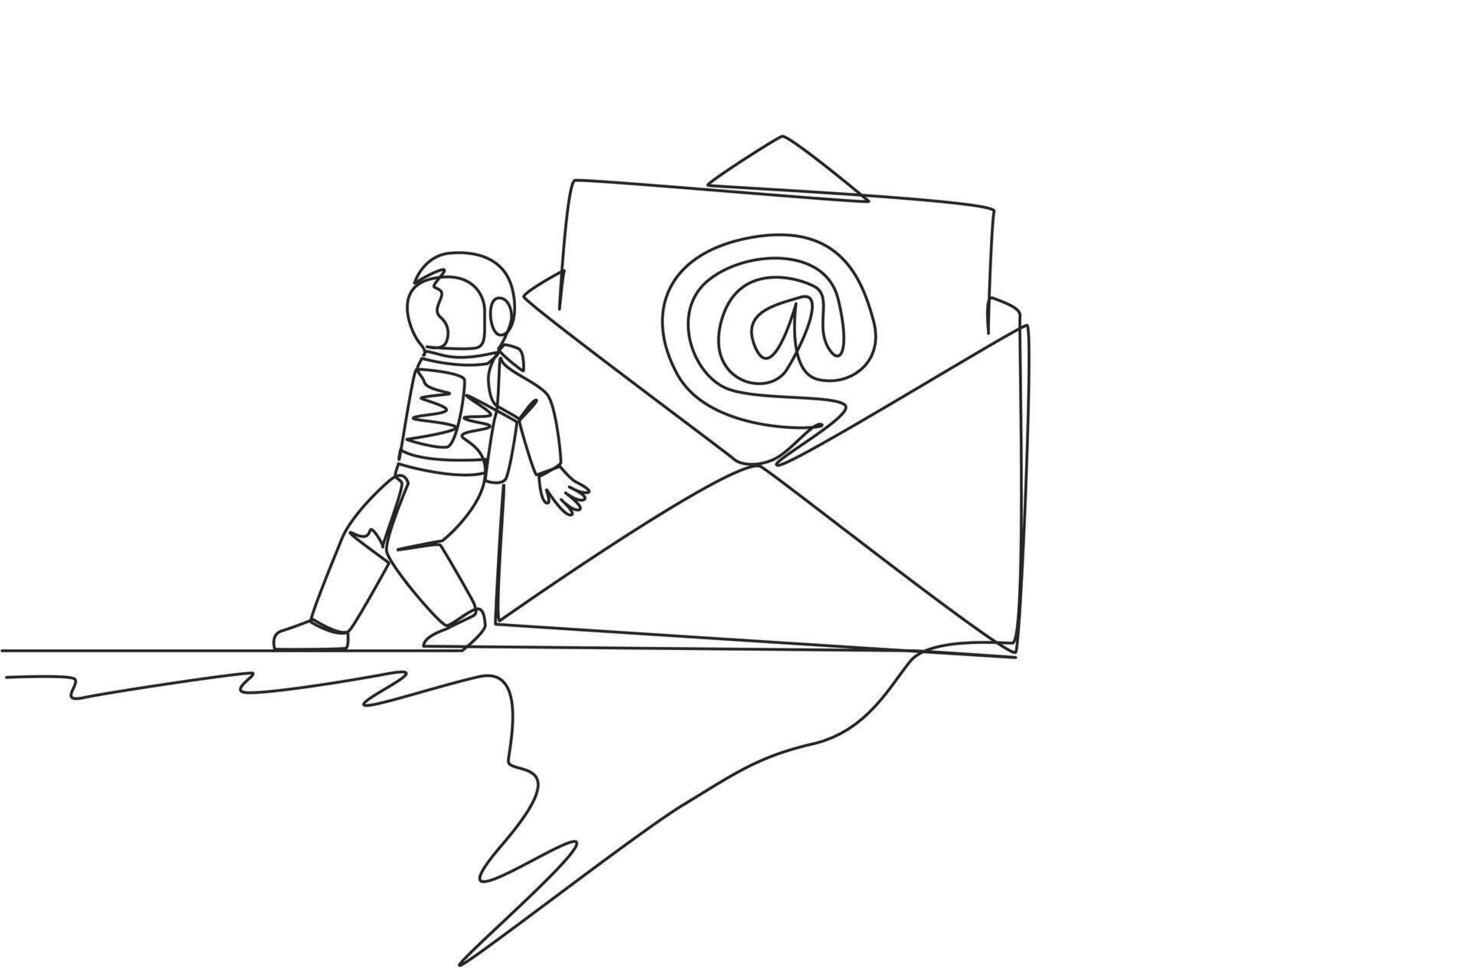 Single one line drawing astronaut pushed giant email icon down with back from the edge of cliff. Eliminate emails that distract the team during expeditions. Continuous line design graphic illustration vector